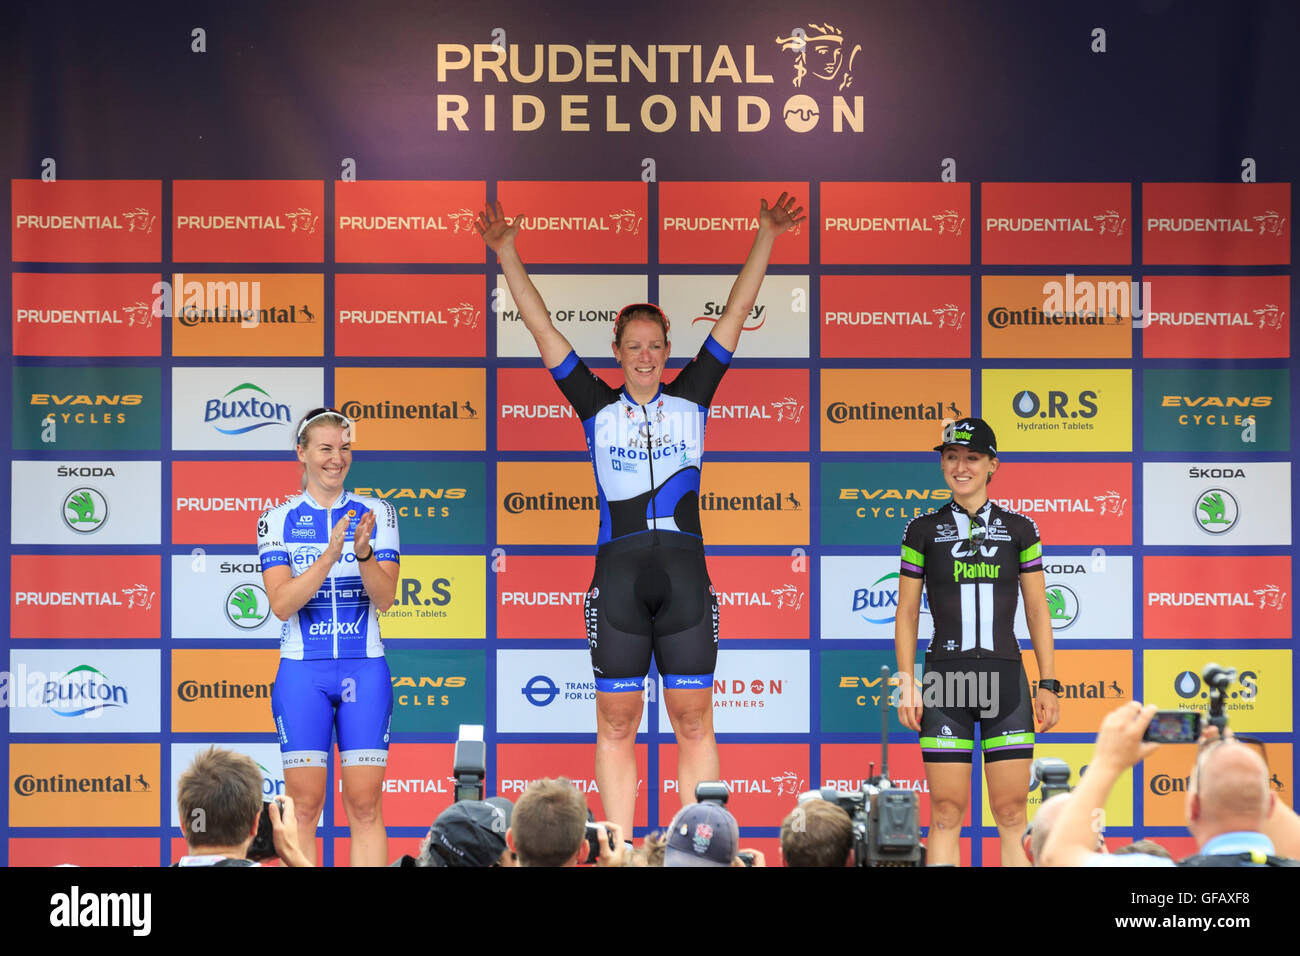 London, UK, 30 July 2016. Prudential RideLondon Classique. Kirsten Wild (centre, Hitec Products) celebrates on the podium of the RideLondon Classique - a 66km race which forms part of the UCI Women's World Tour. Wild won €25,000 - the biggest race prize in women's cycling - and equal to the amount on offer at the men's RideLondon-Surrey Classic. Nina Kessler (left, Lensworld Zannata Etixx) and Leah Kirchmann (right, Team Liv Plantur) completed the podium. Credit:  Clive Jones/Alamy Live News Stock Photo